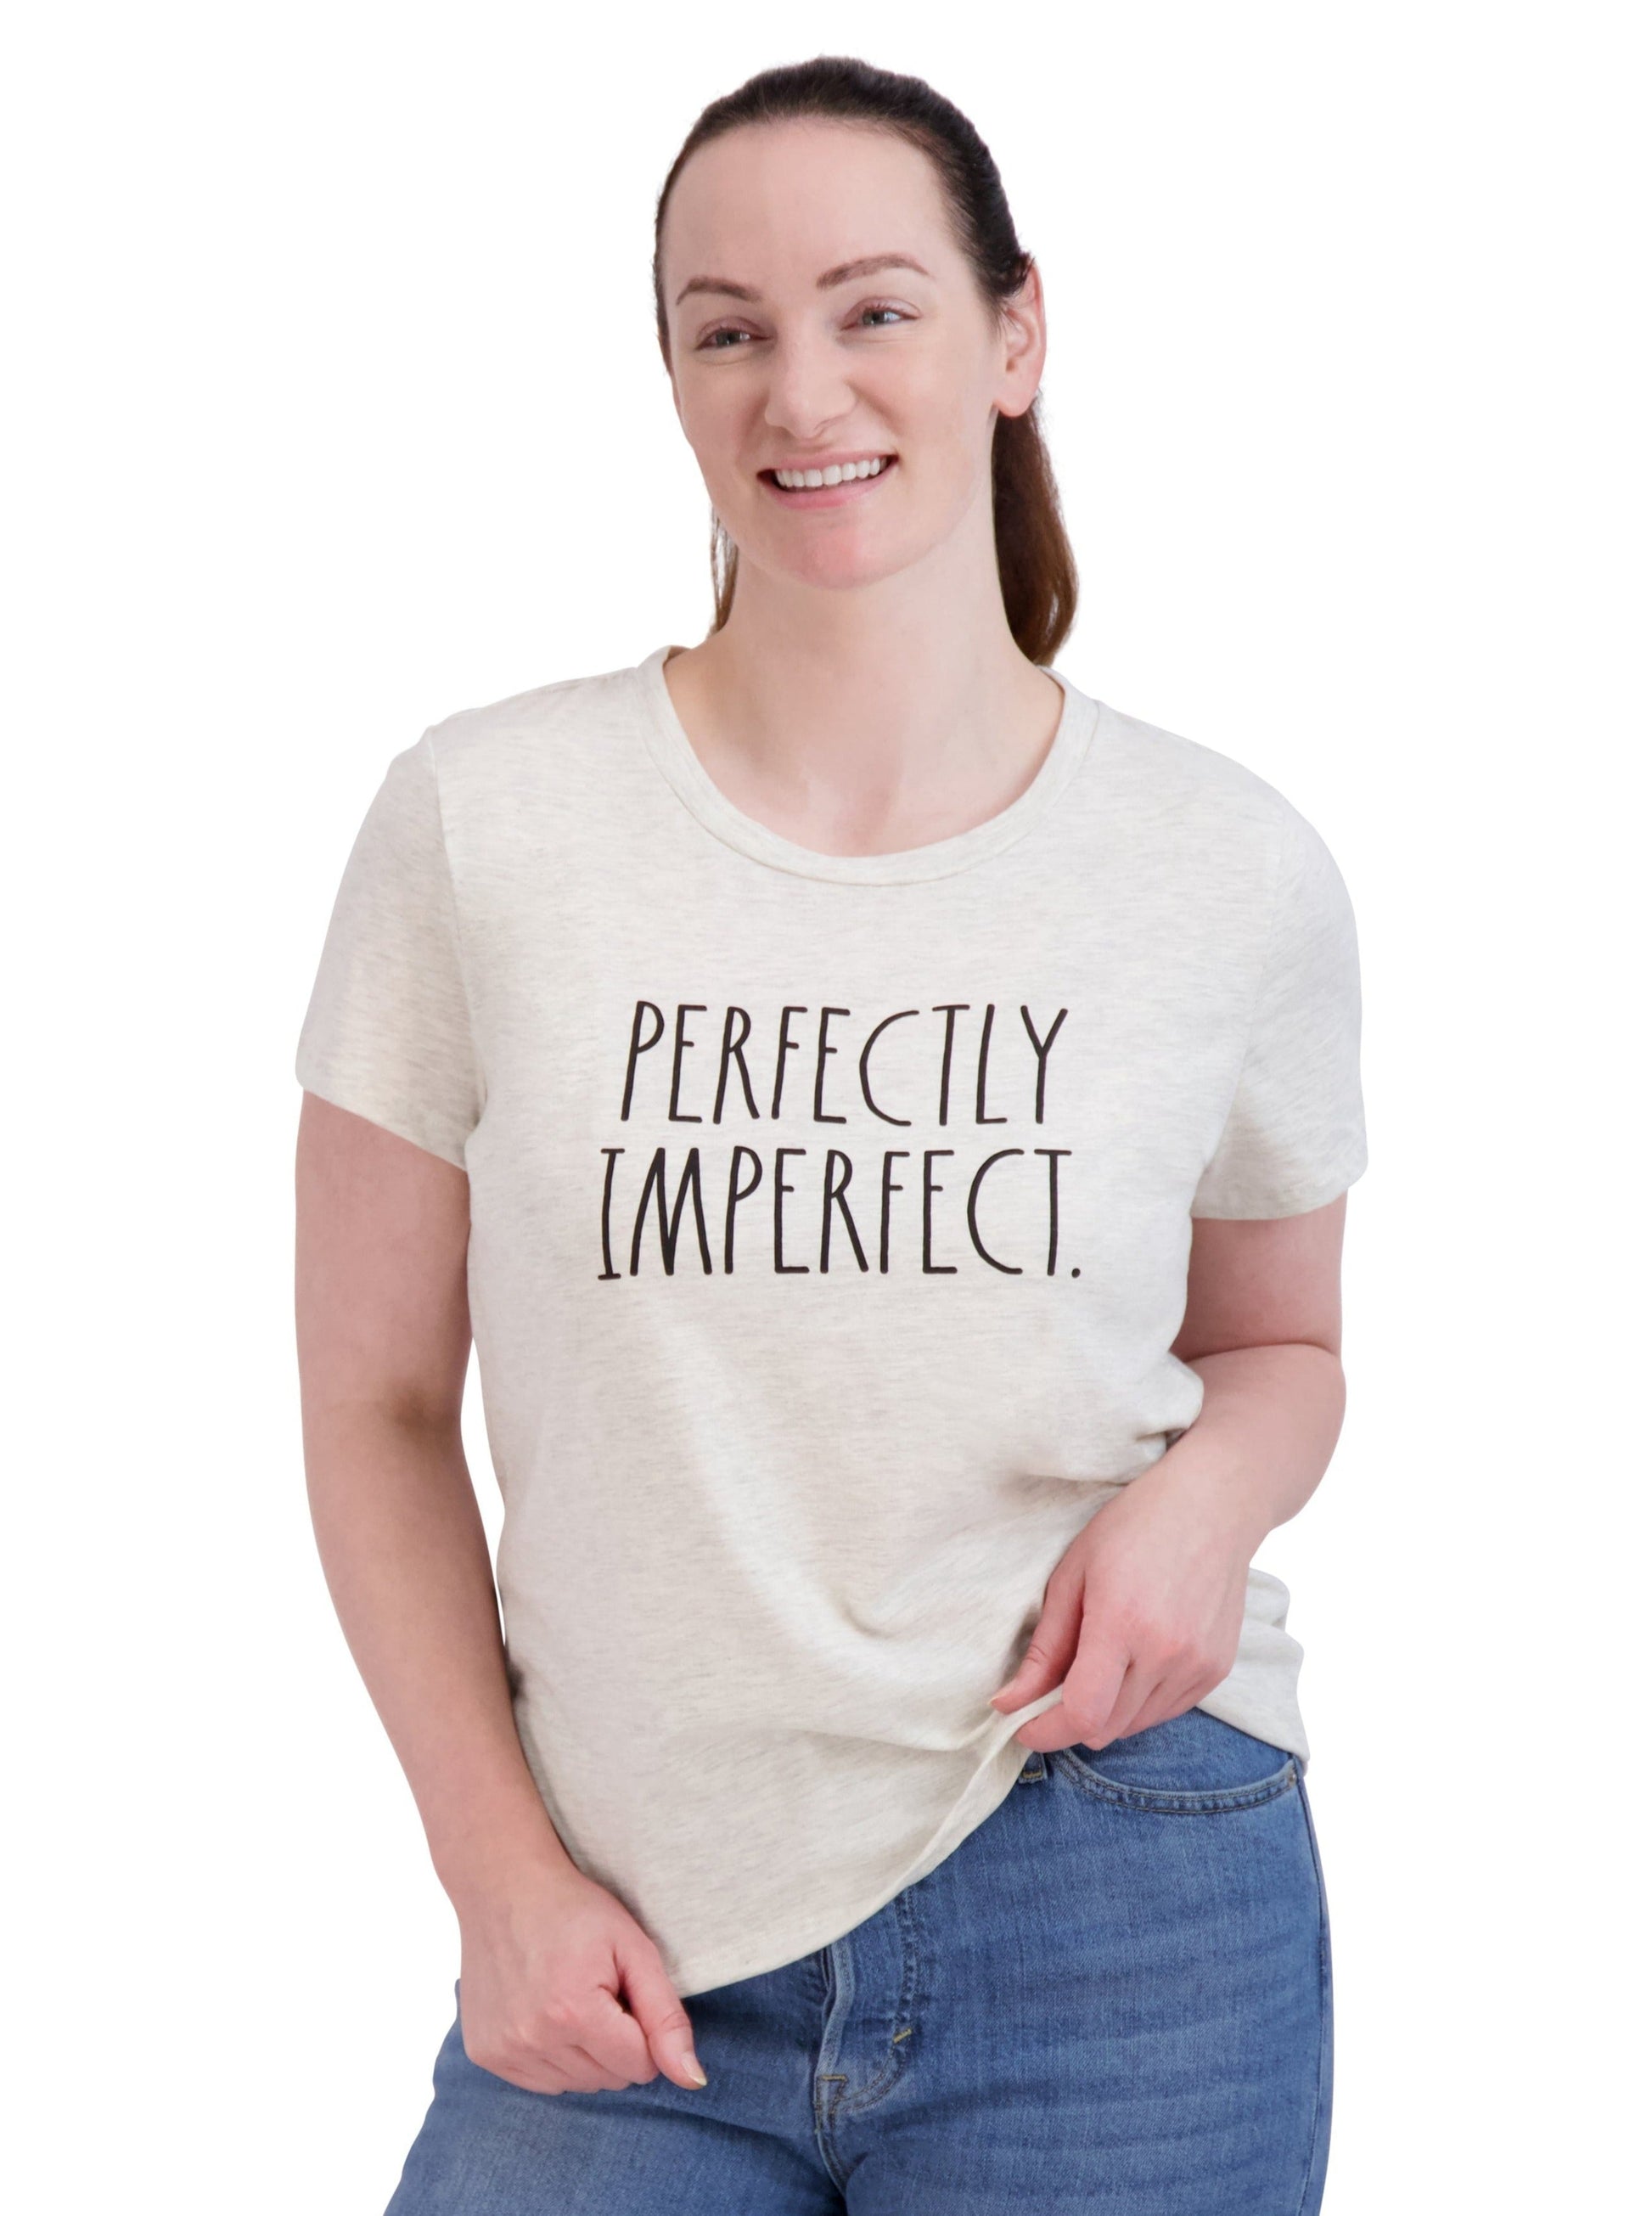 Women's "PERFECTLY IMPERFECT" Short Sleeve Icon T-Shirt - Rae Dunn Wear